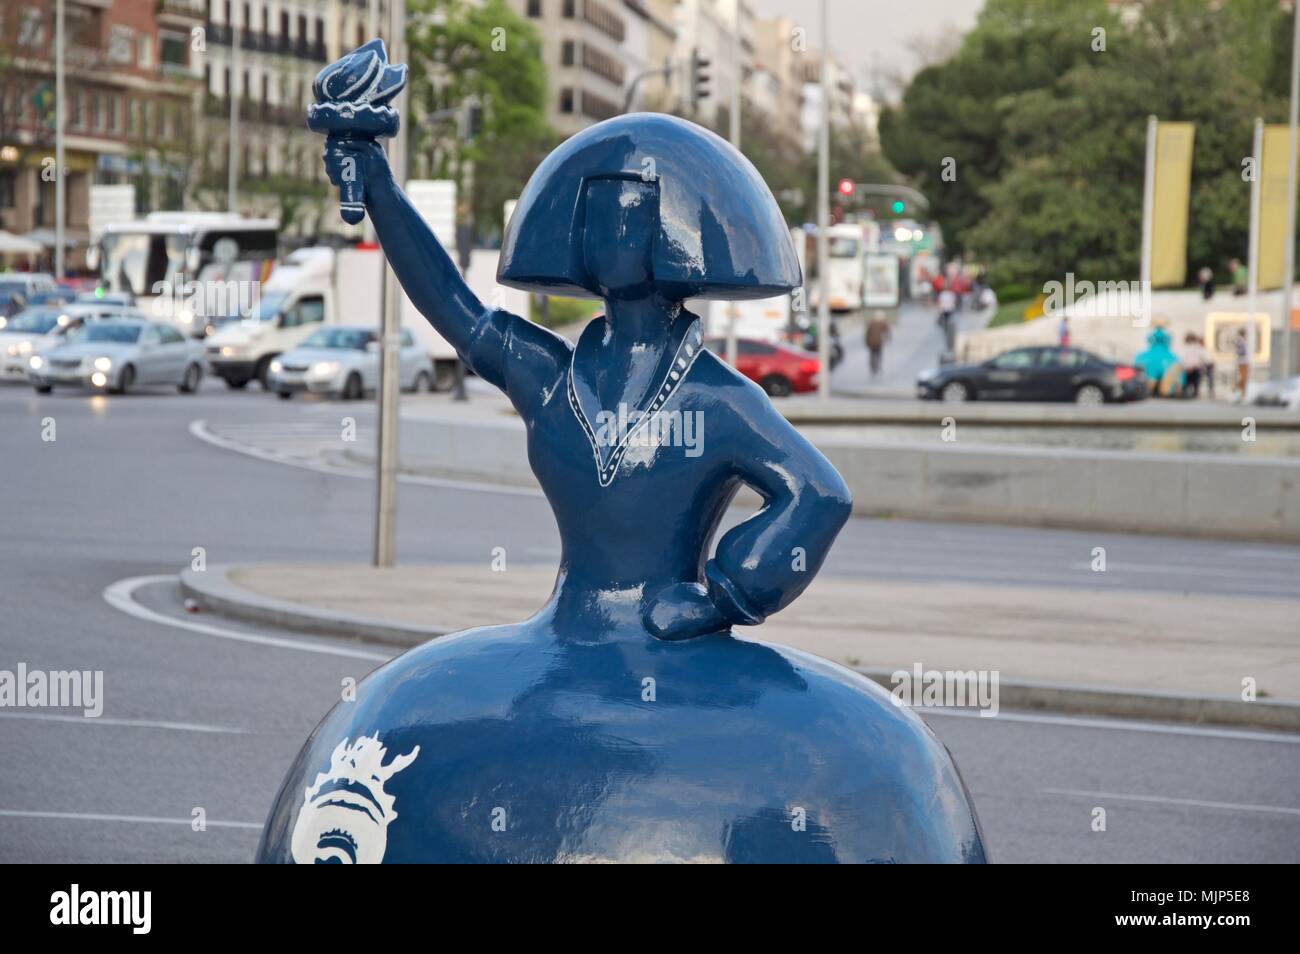 MADRID, SPAIN - MAY 5: Sculpture of a surreal menina on May 5, 2018 in Madrid, Spain. Stock Photo